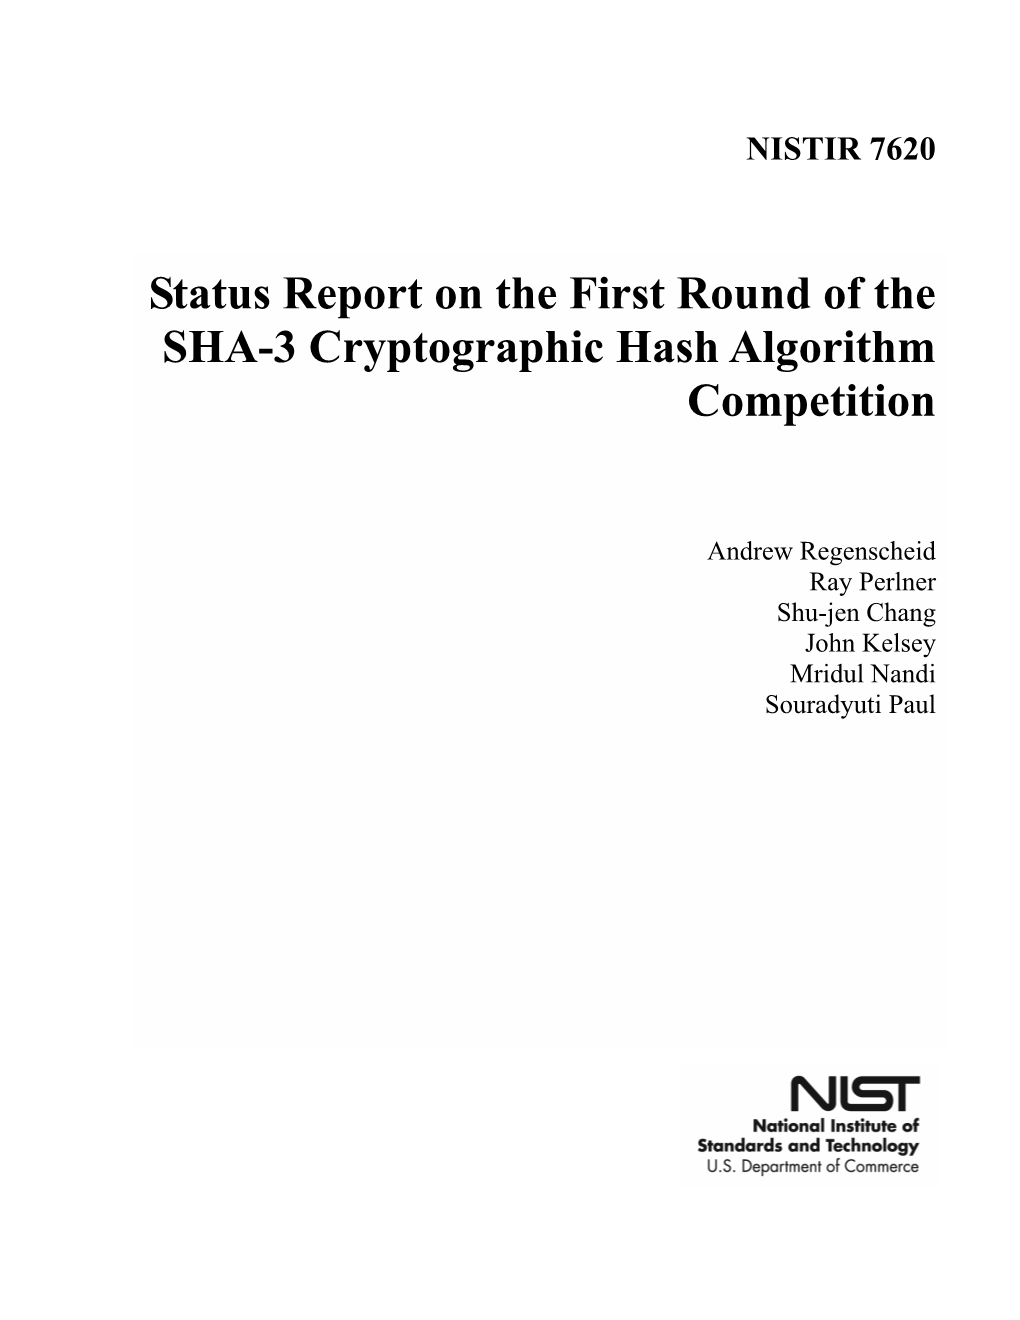 NISTIR 7620-Status Report on the First Round of the SHA-3 Cryptographic Hash Algorithm Competition